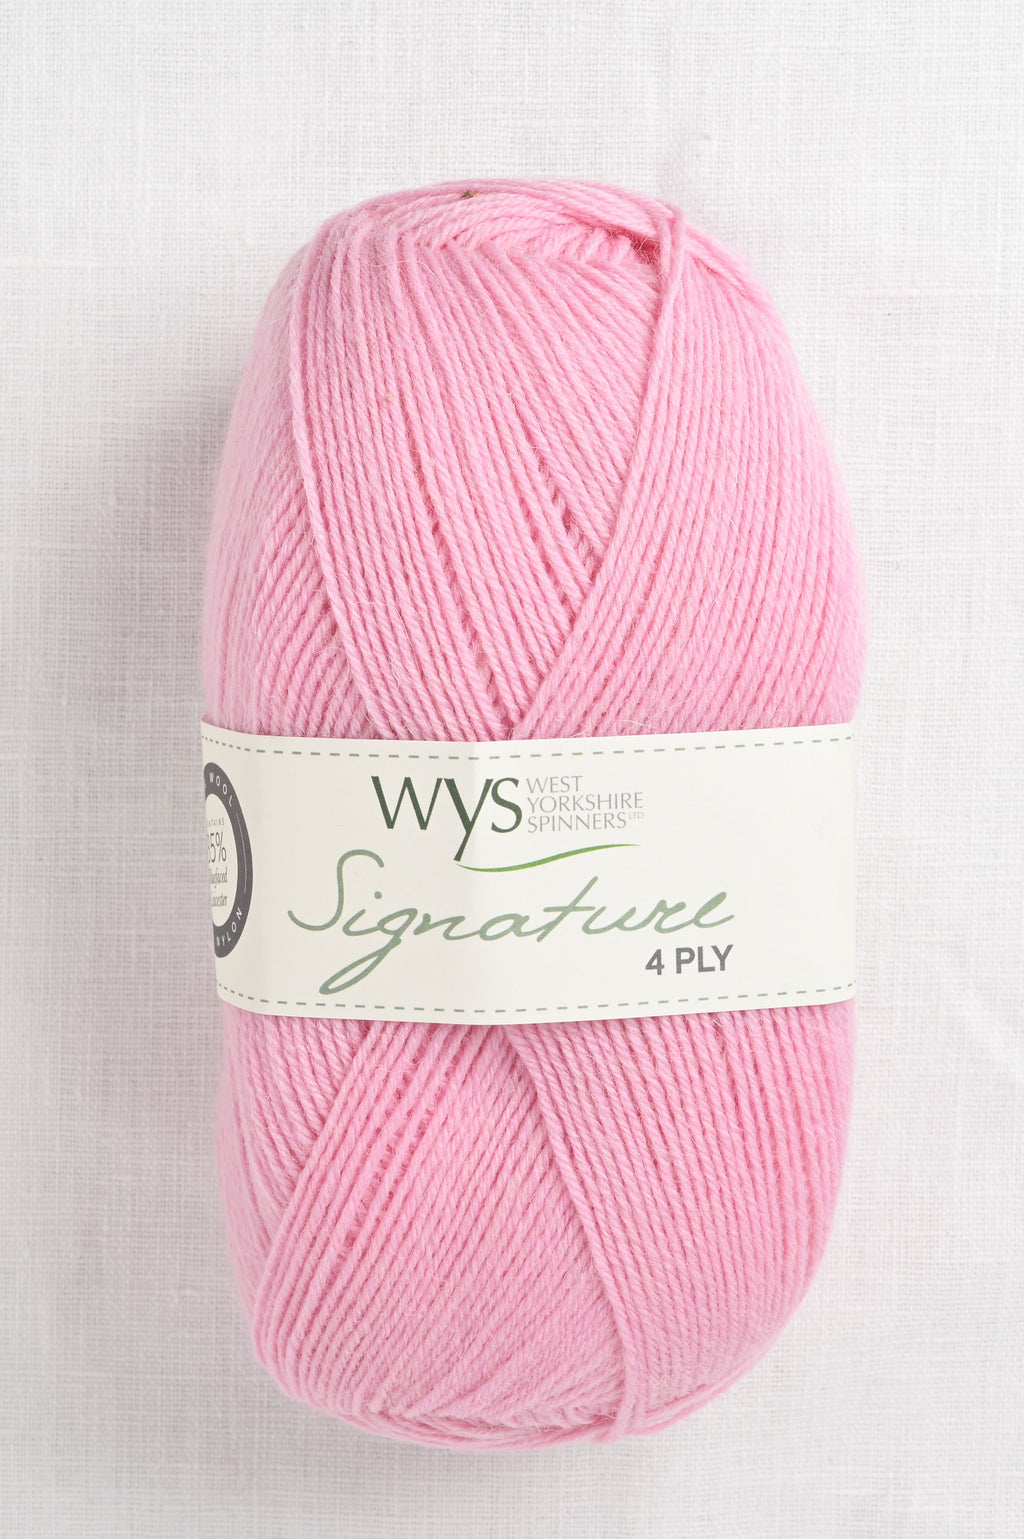 WYS Signature 4 Ply 547 Candy Floss